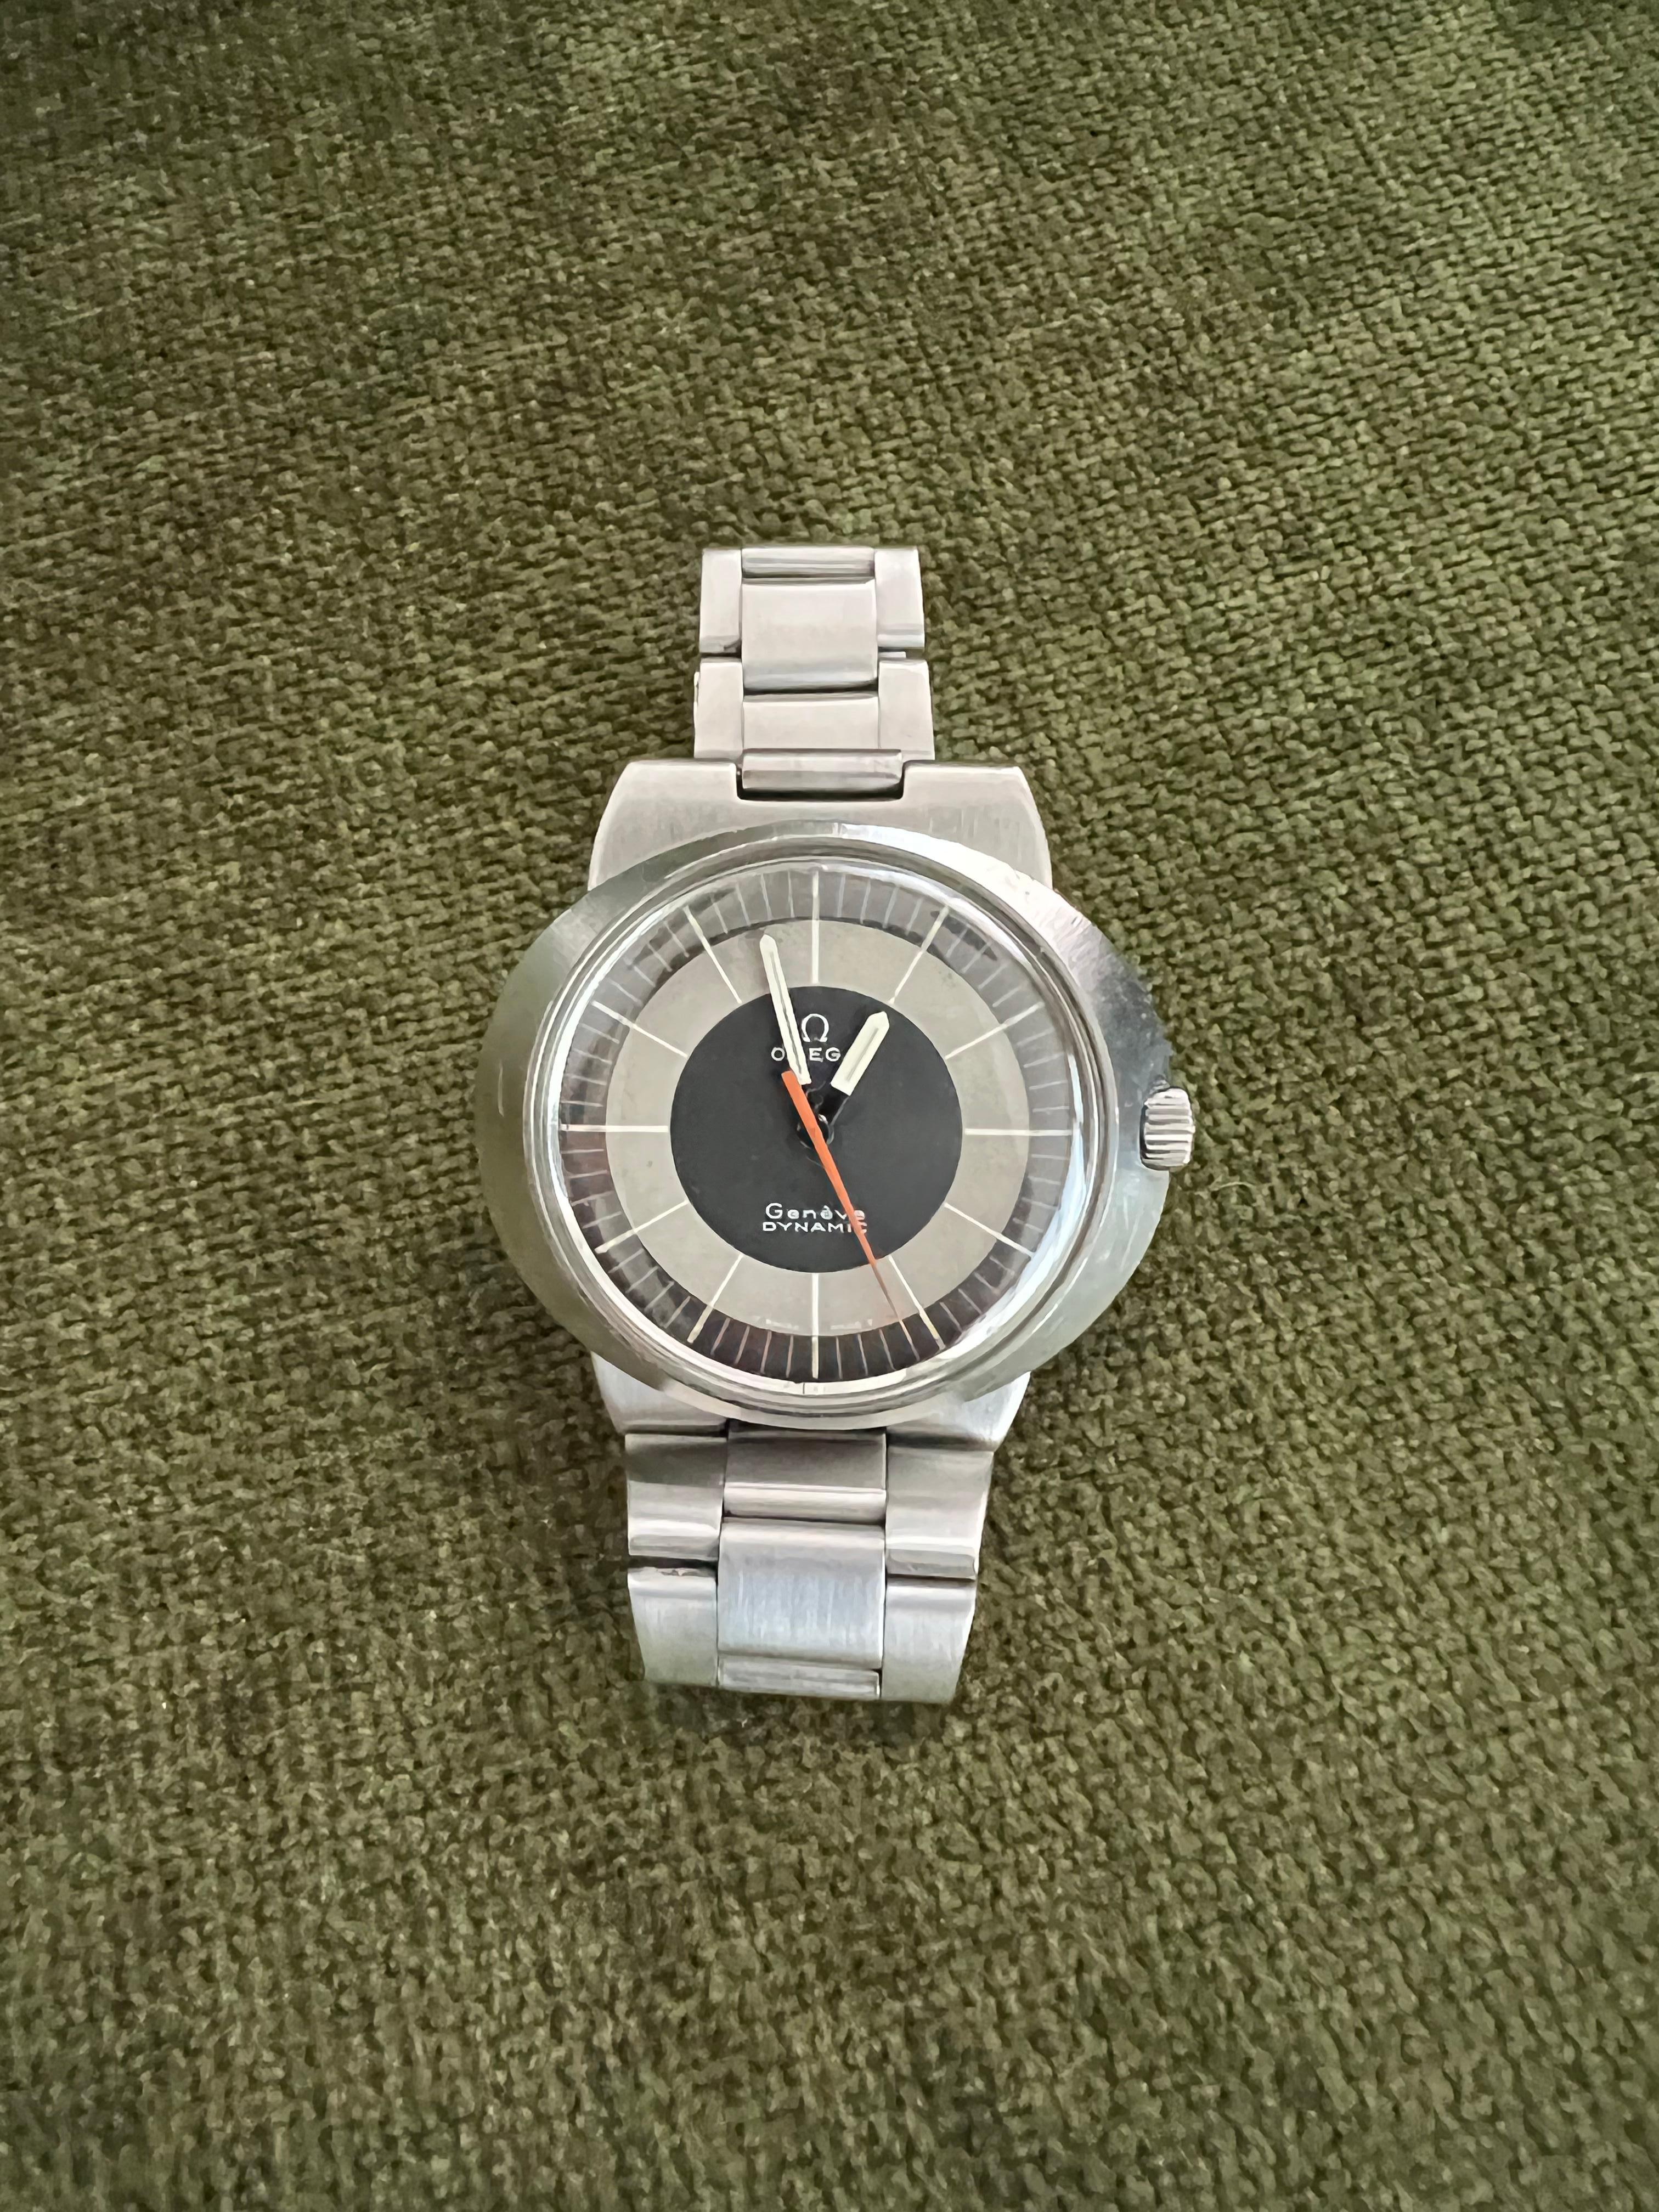 Artist Omega Dynamic Vintage c. 1970s Watch W/ Tricolored Dial